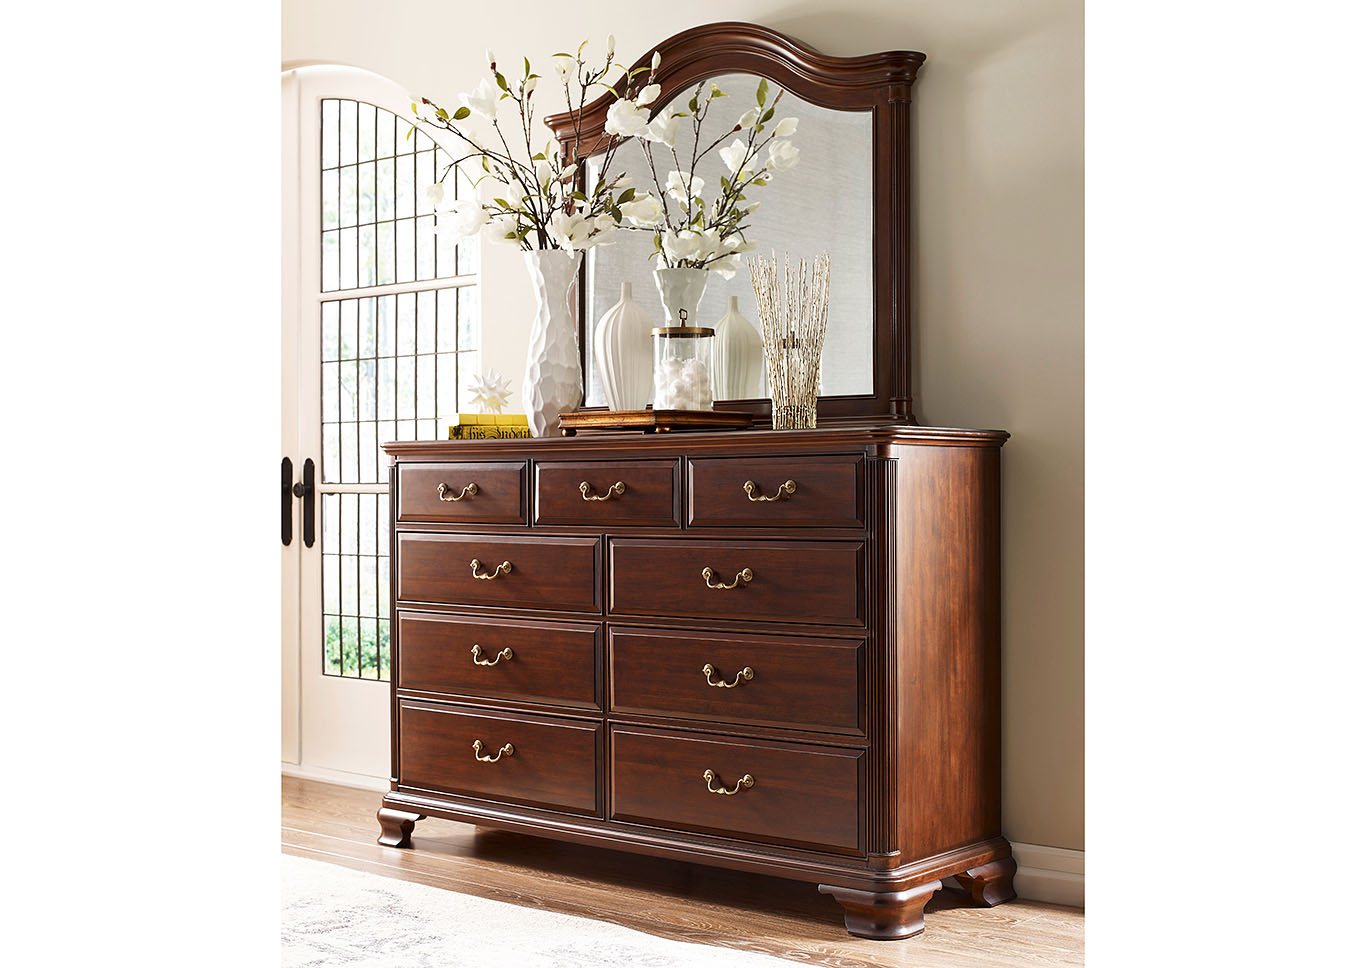 Penland S Furniture Hadleigh Classic Cherry Arched Dresser Mirror